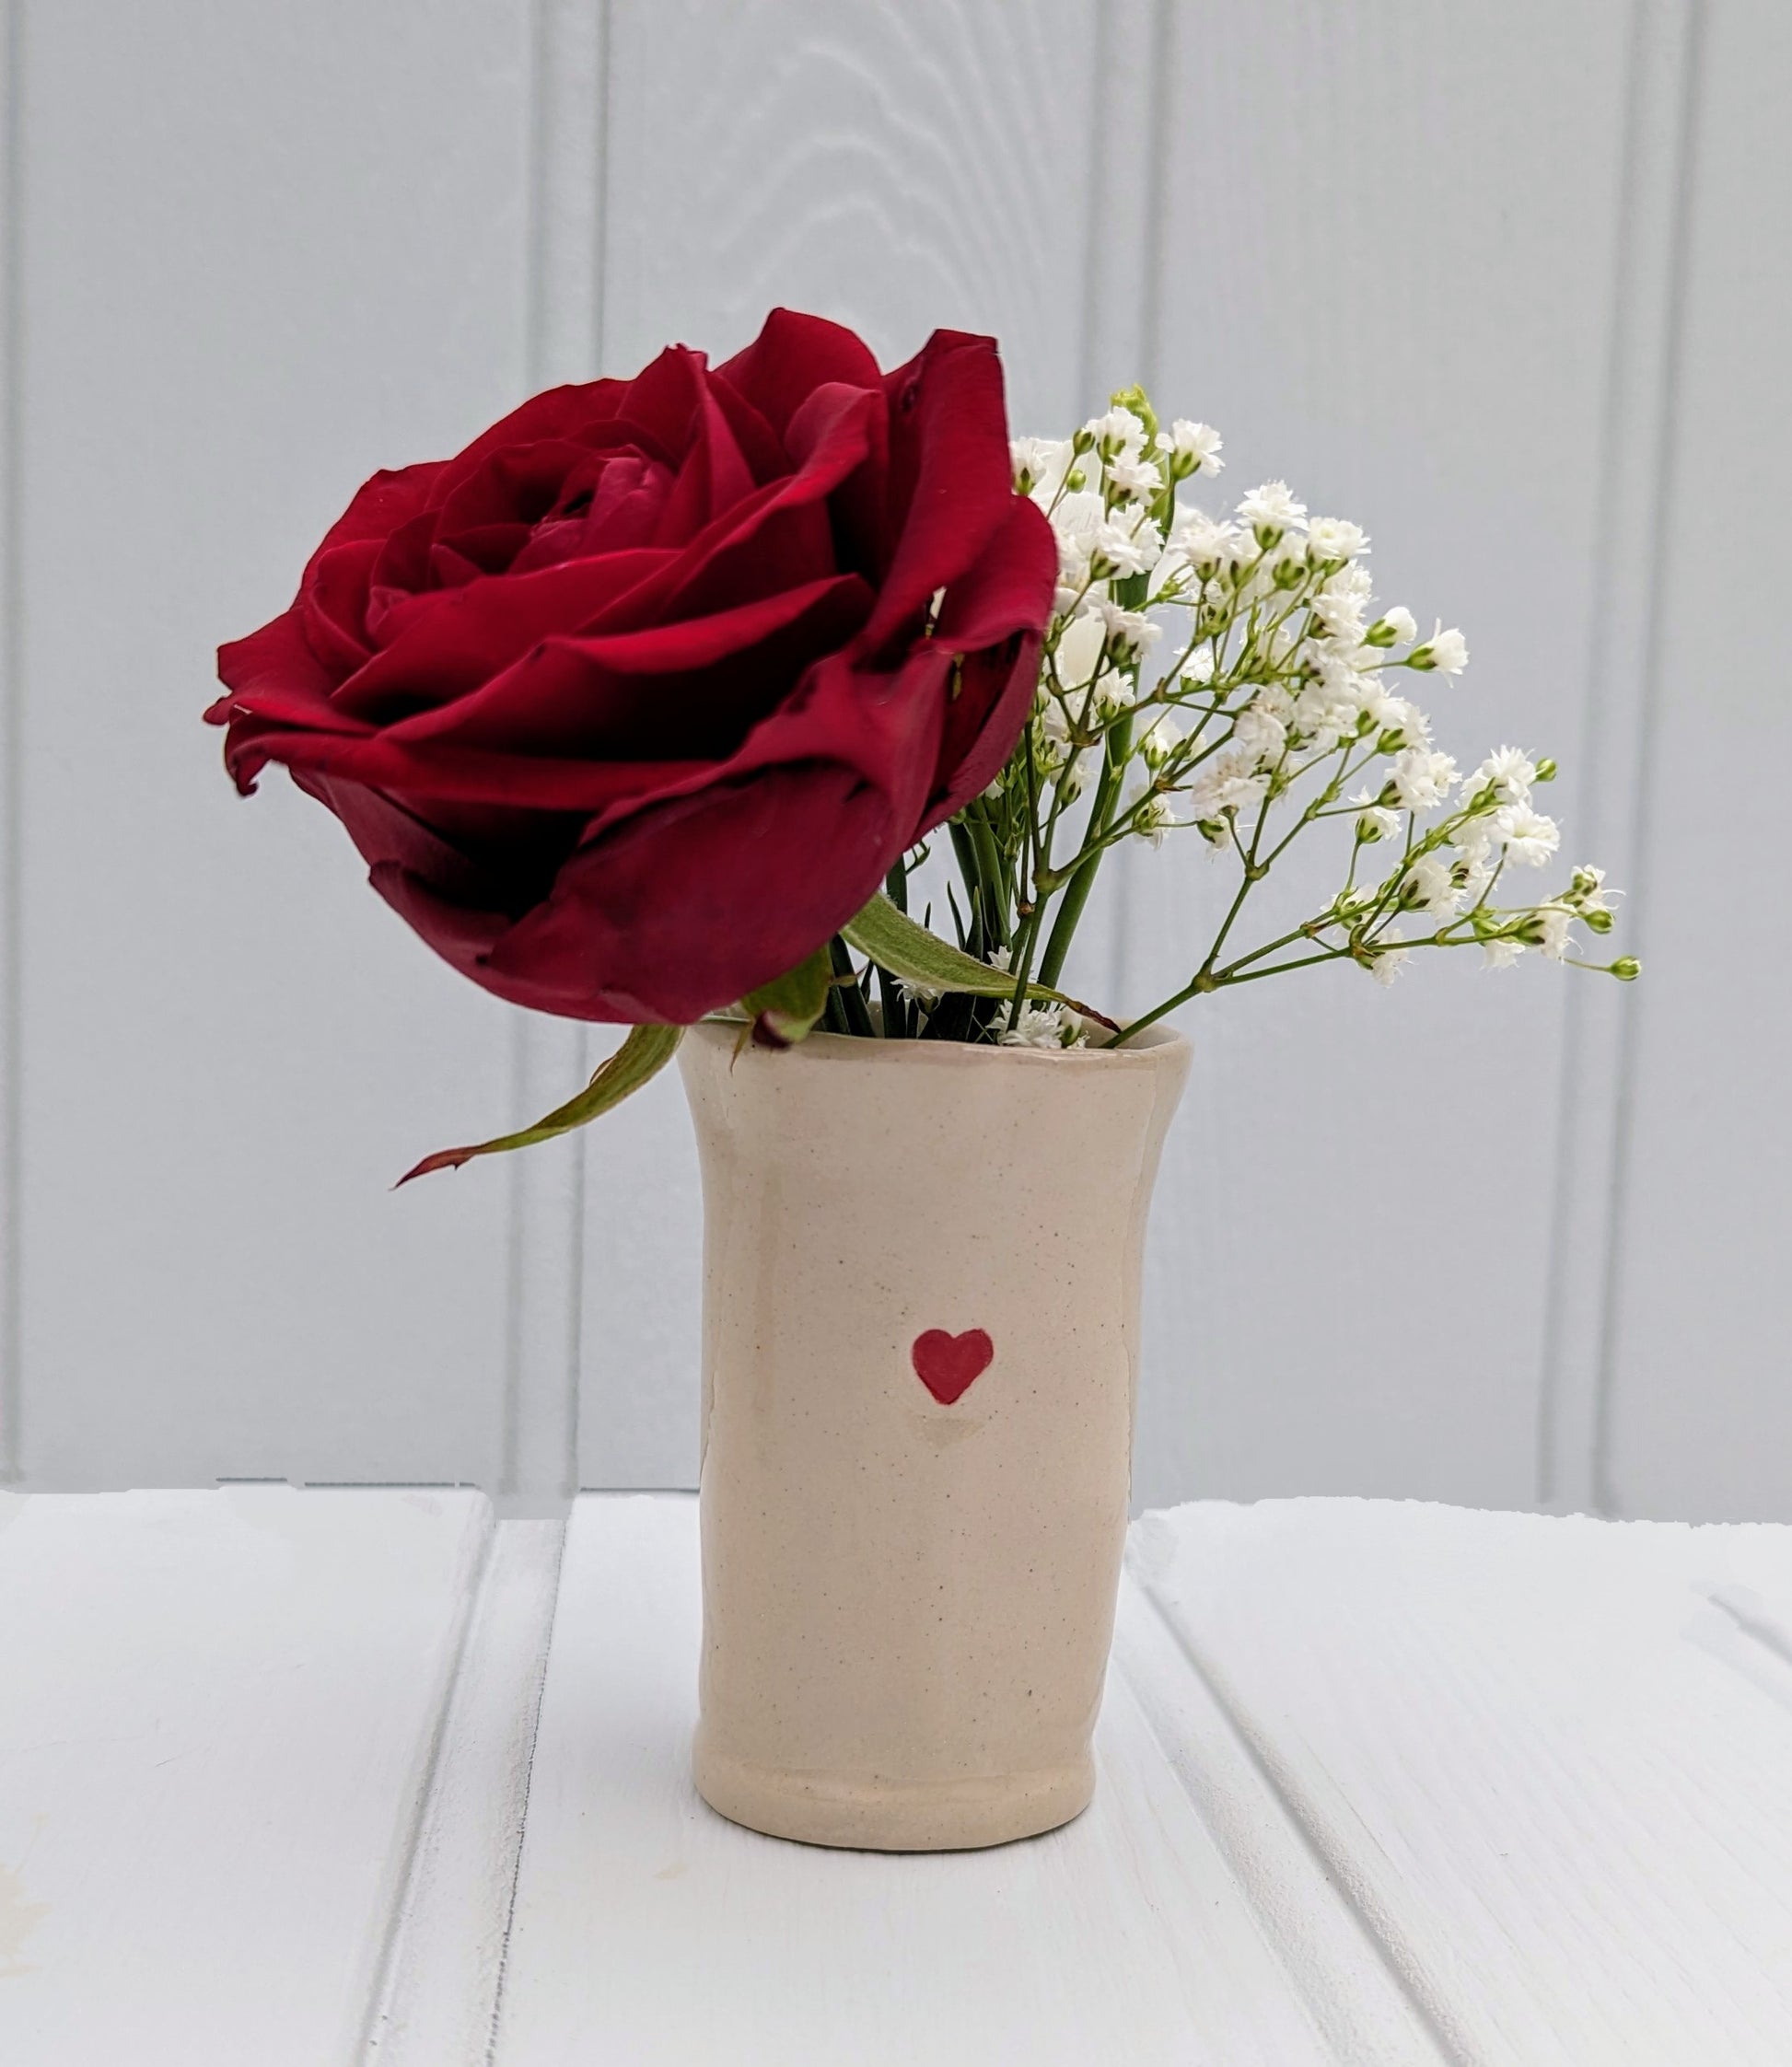 Sea Bramble Ceramics - Handmade Stoneware, little Sweet pea vases, natural colour with a delicate red heart